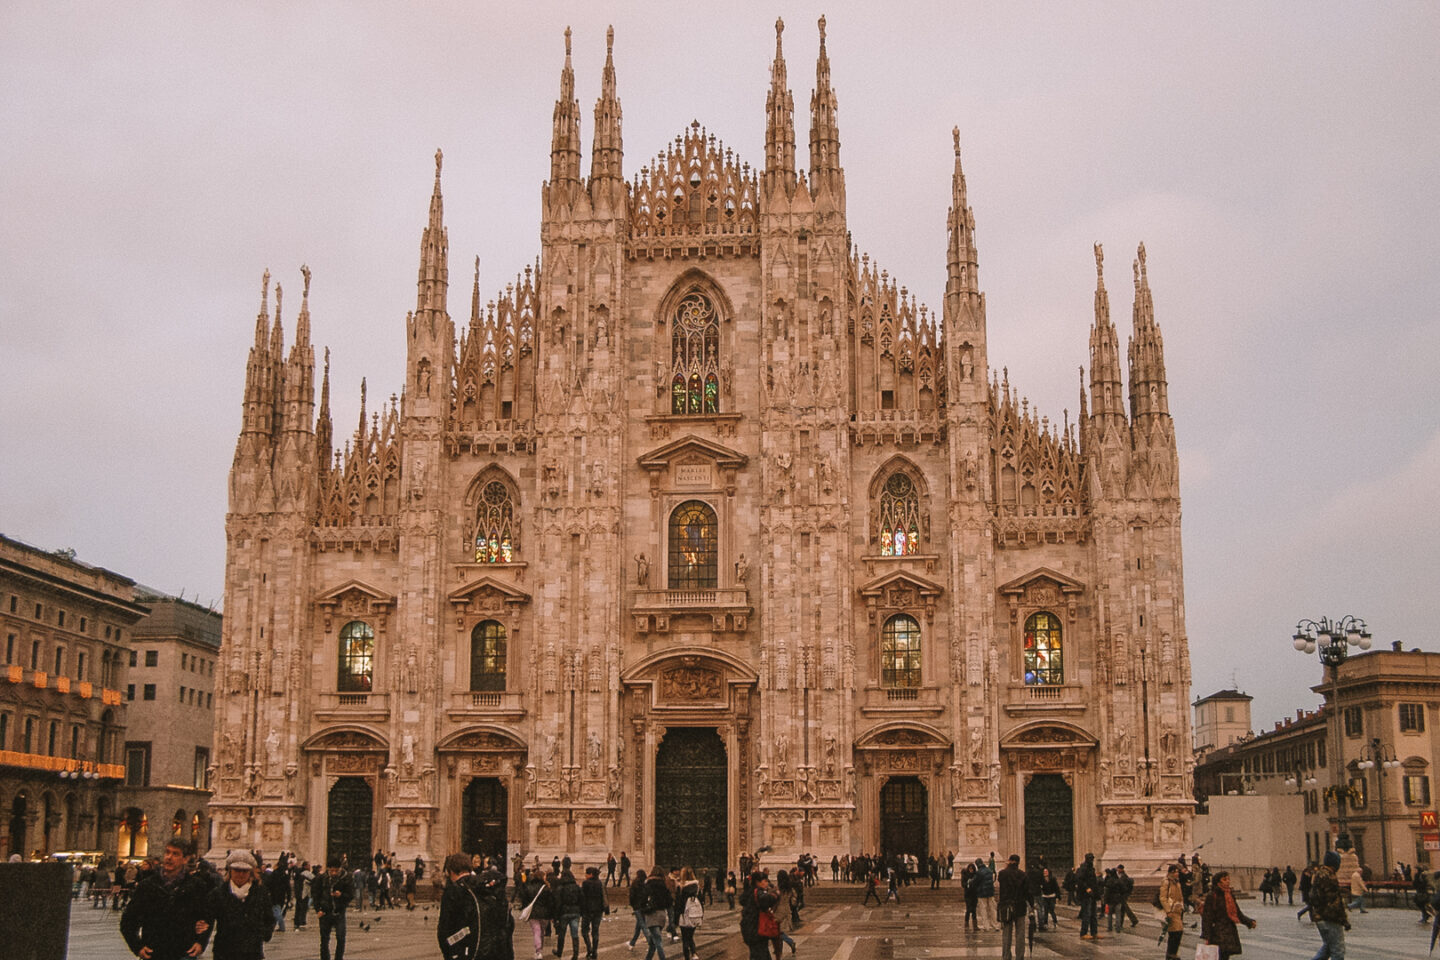 Duomo di Milano from the front